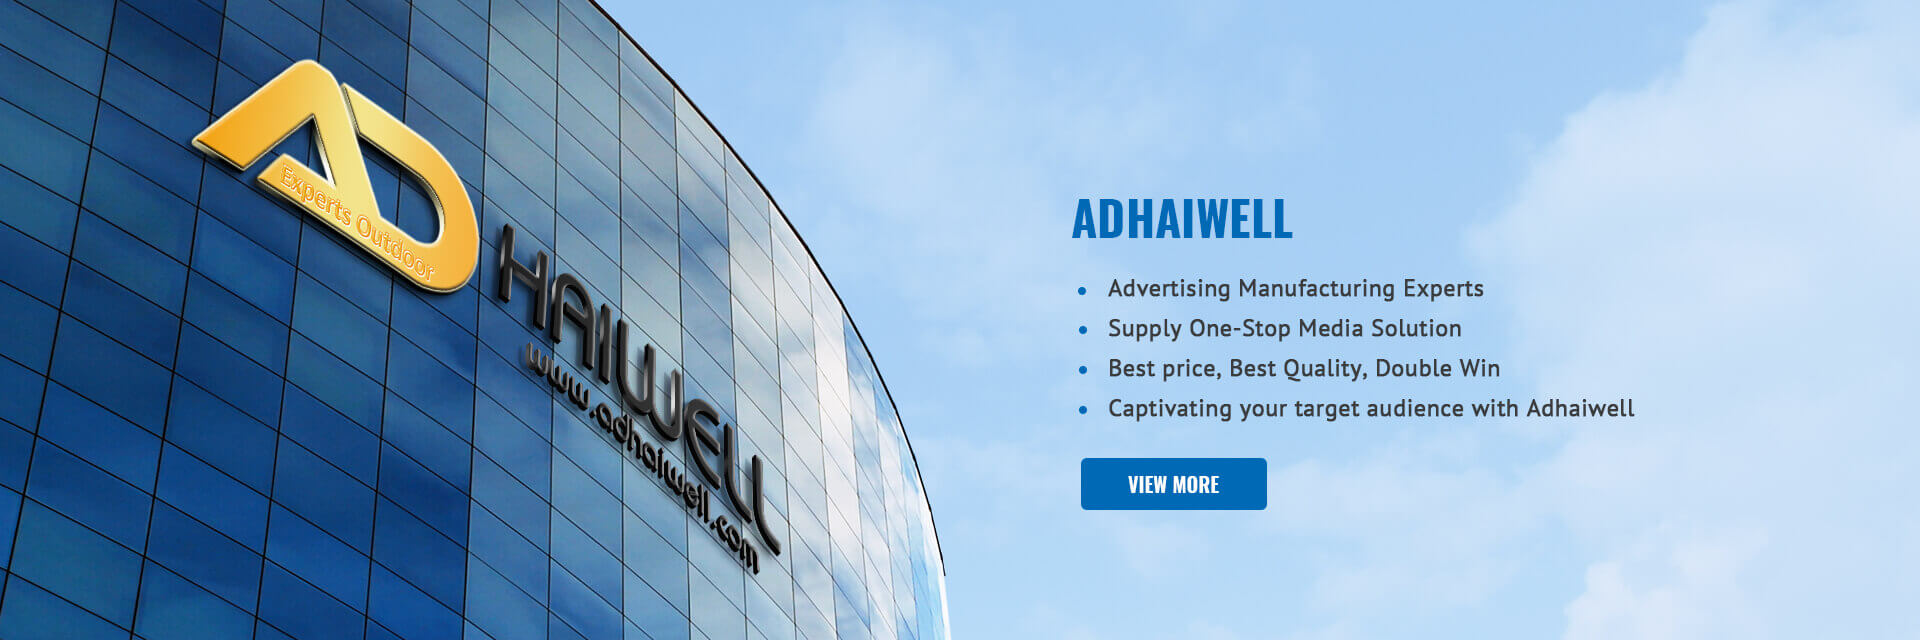 Adhaiwell Outdoor Advertising Experts